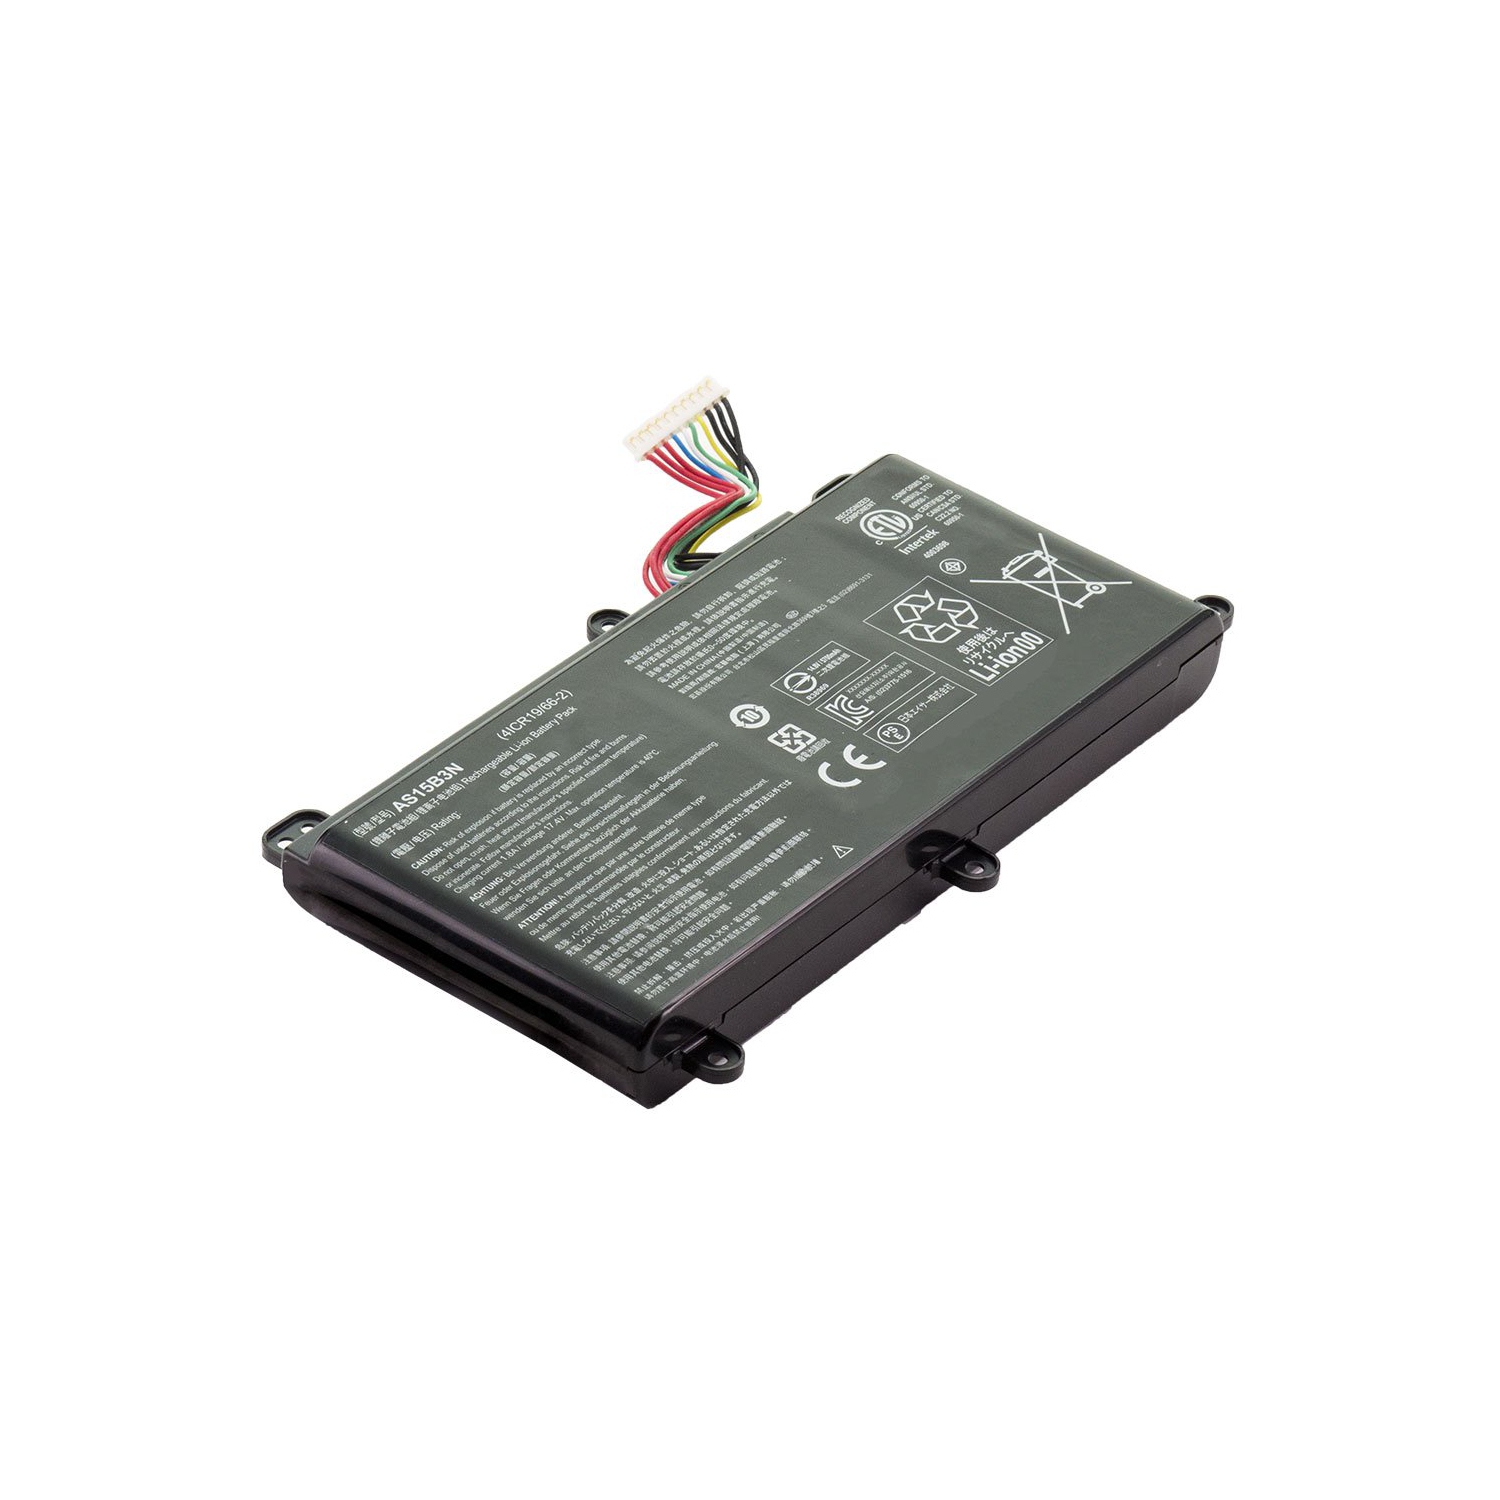 Laptop Battery Replacement for Acer Predator 15 G9-592-51BB, AS15B3N, KT.00803.004, KT.00803.005